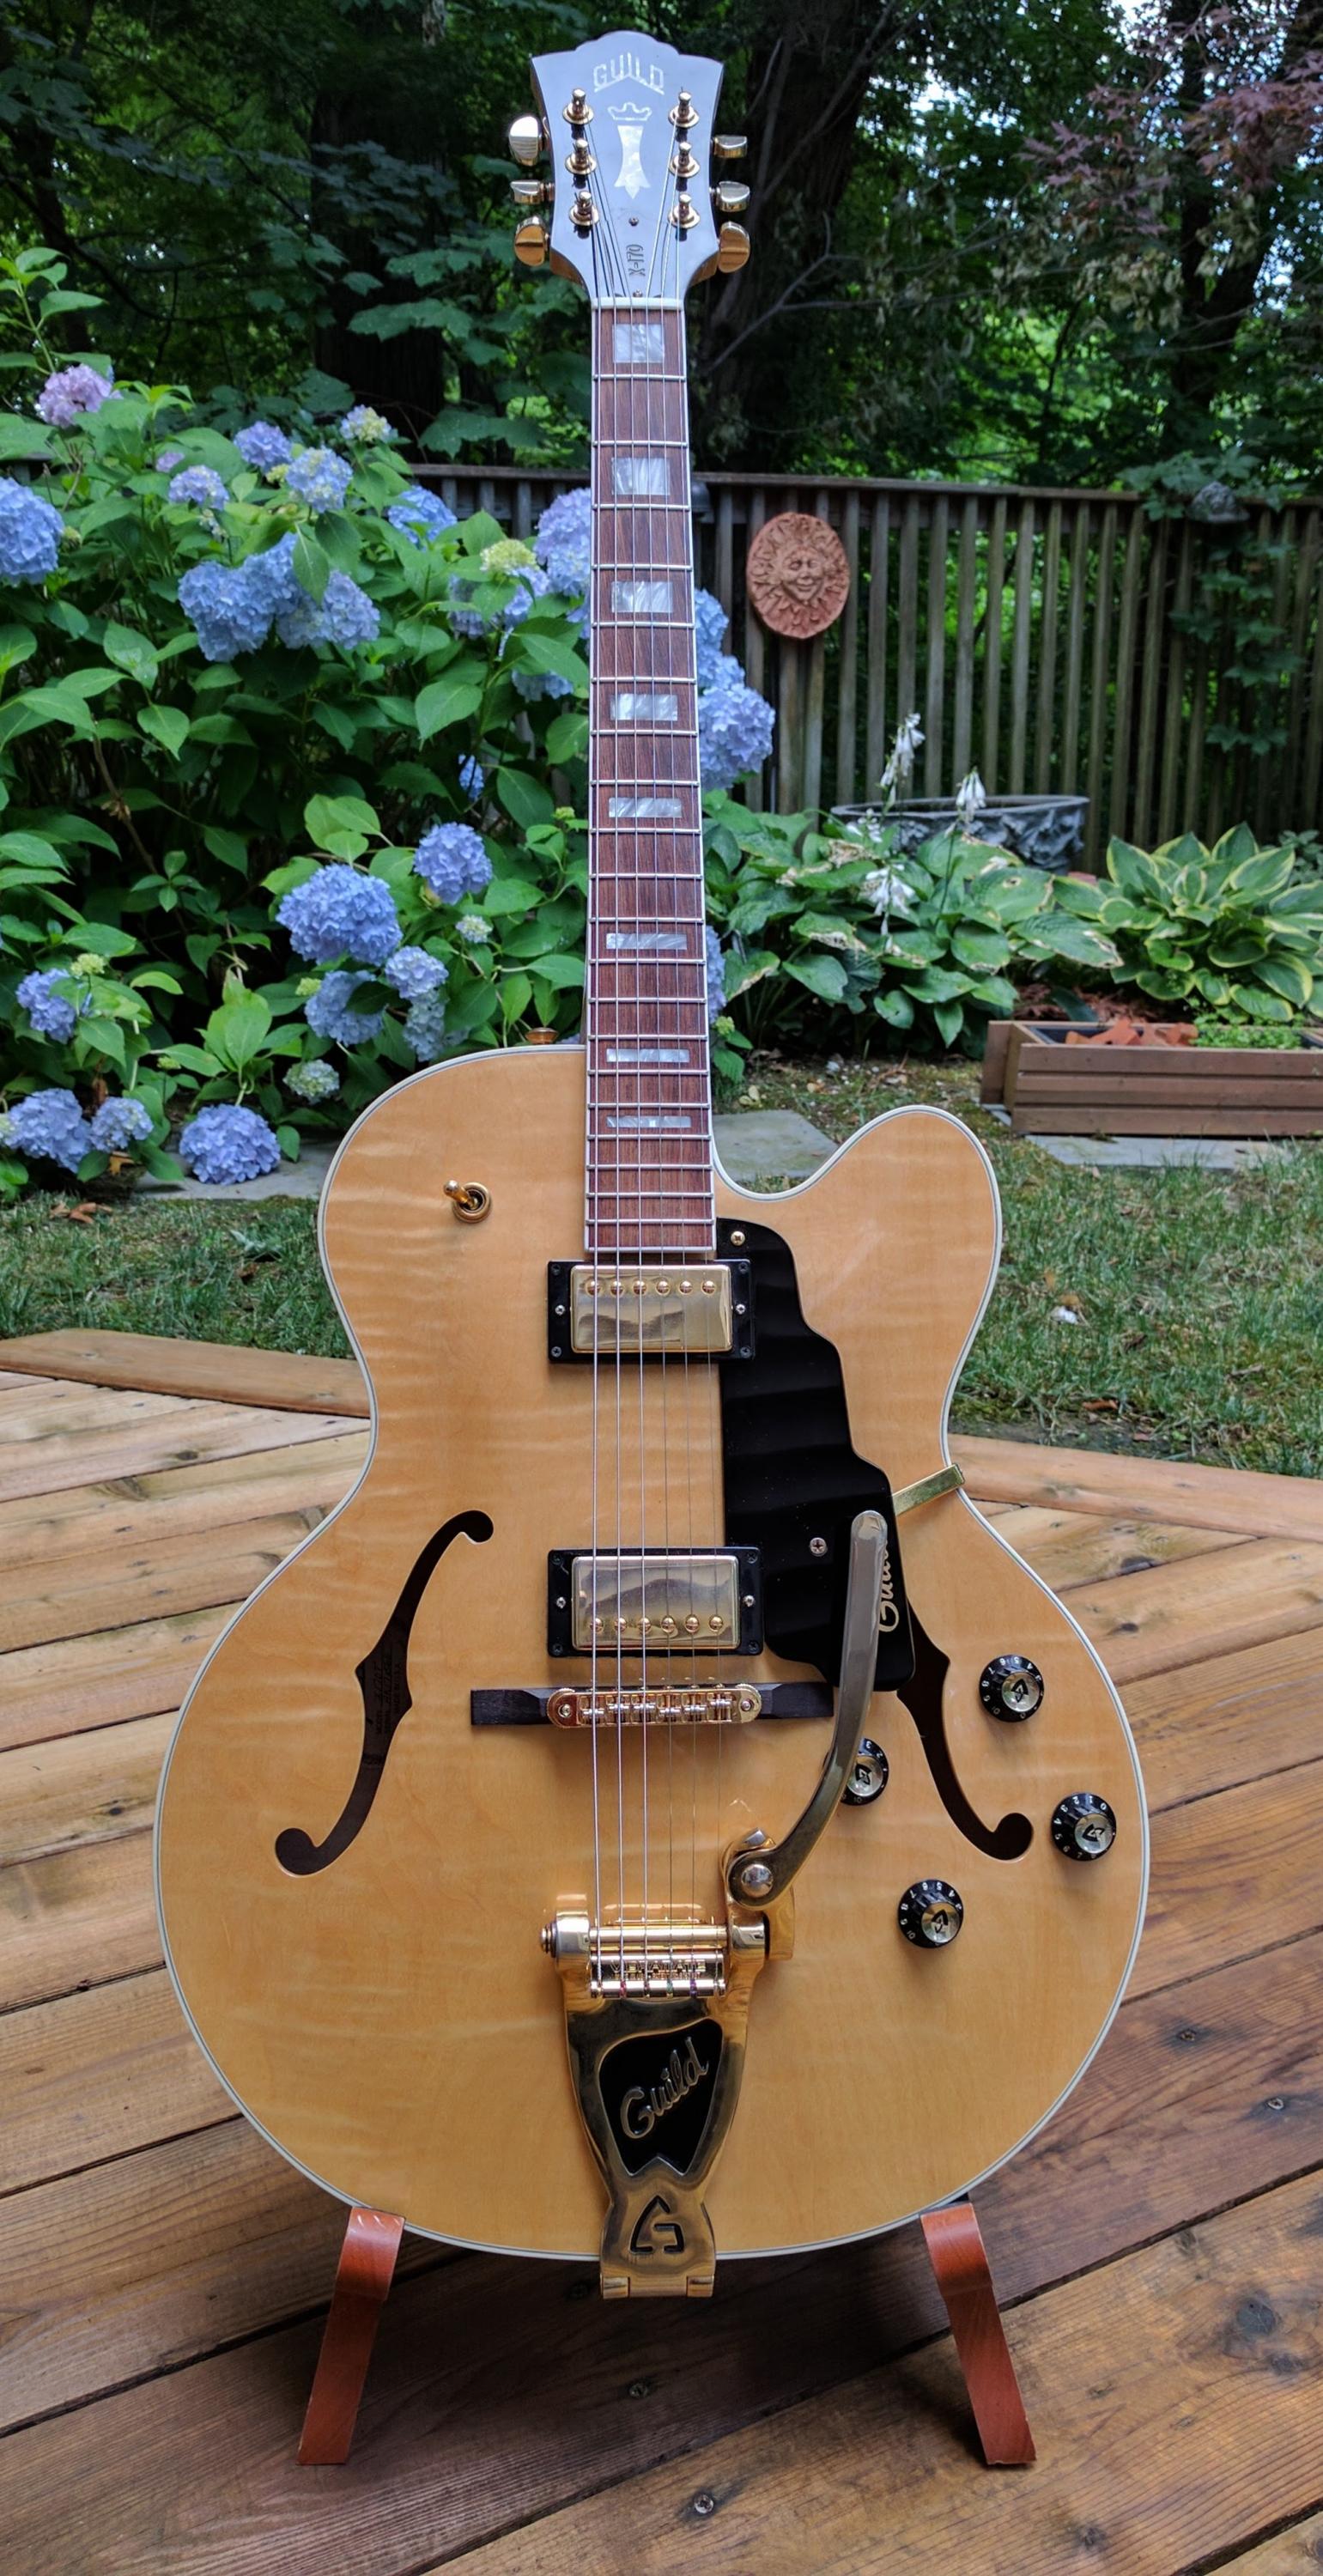 Your Preferred ES-335 Based (Non-Gibson) Guitar-img_20170701_182407-jpg